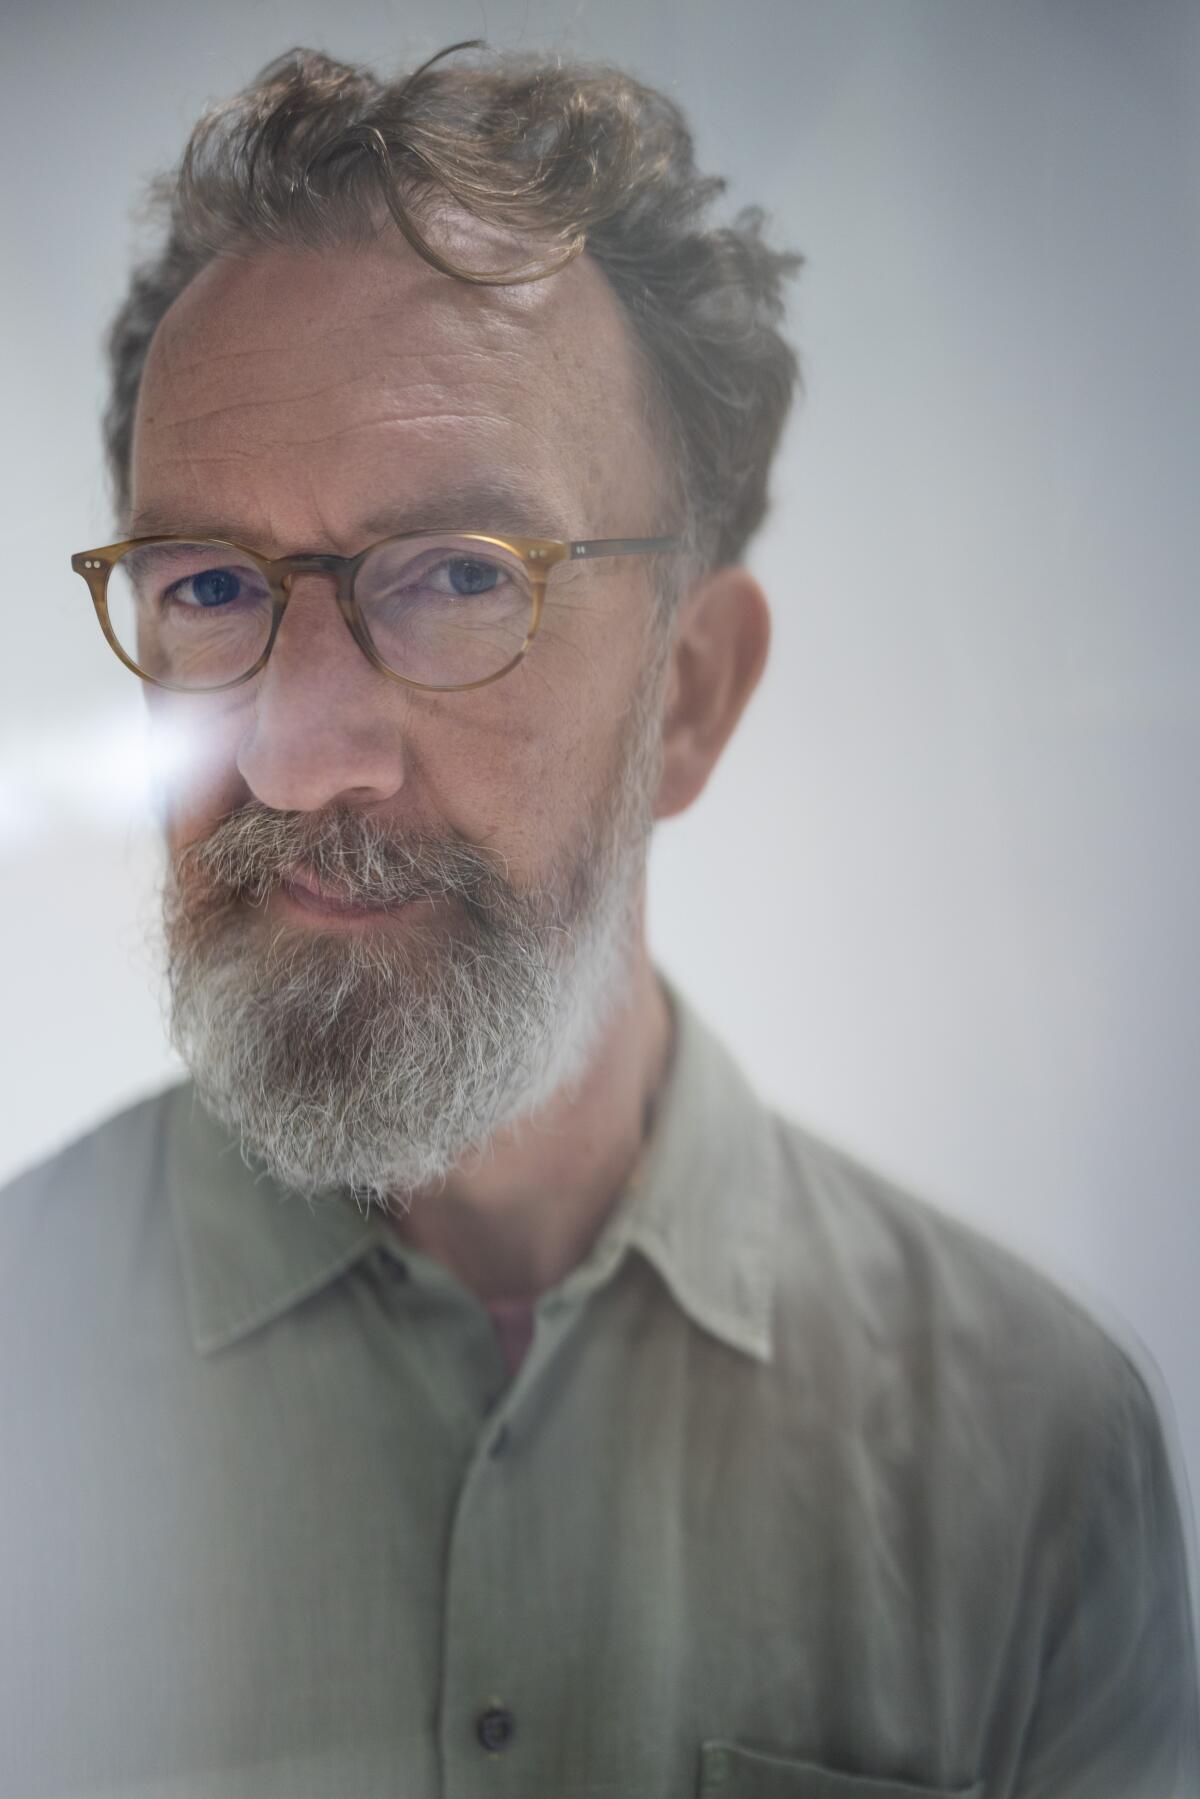 Seen through a prism: A white-bearded, bespectacled man poses for a portrait against a gray background